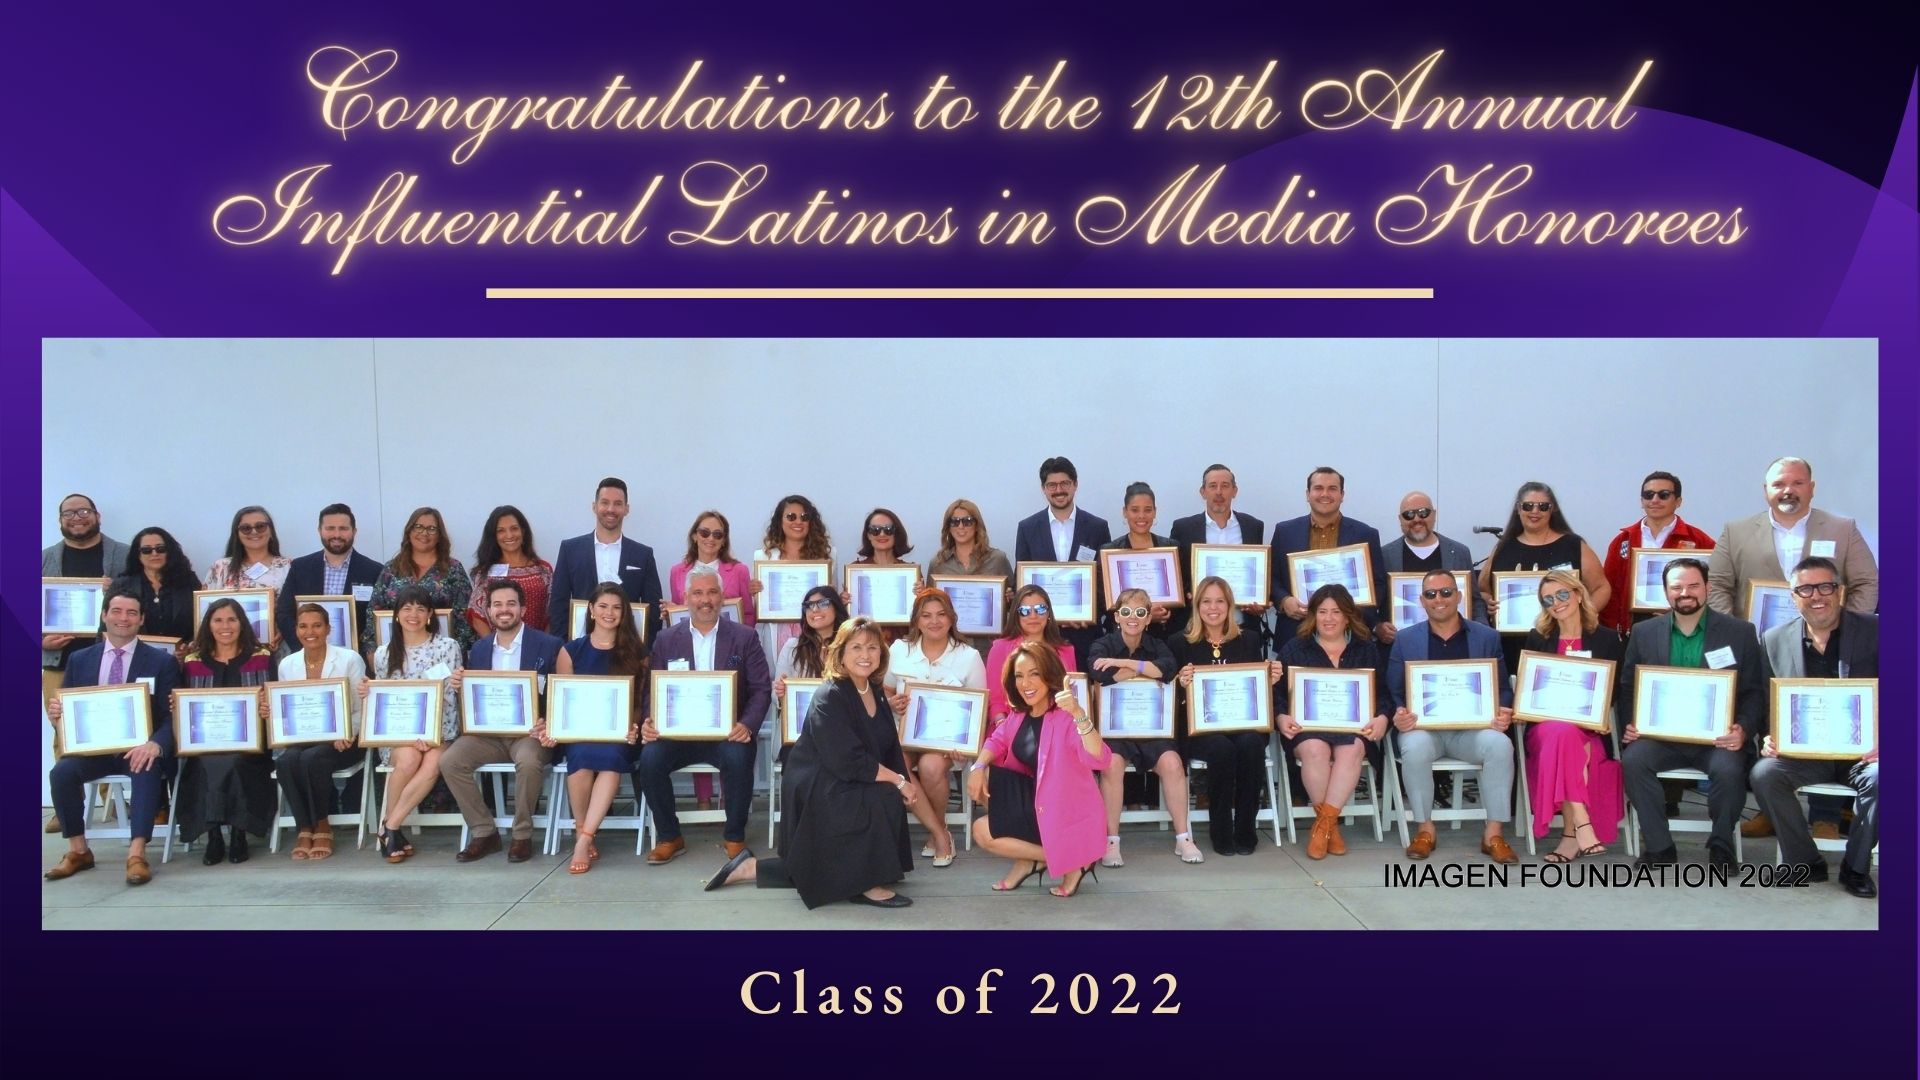 Influential Latinos in Media Honorees - Class of 2022